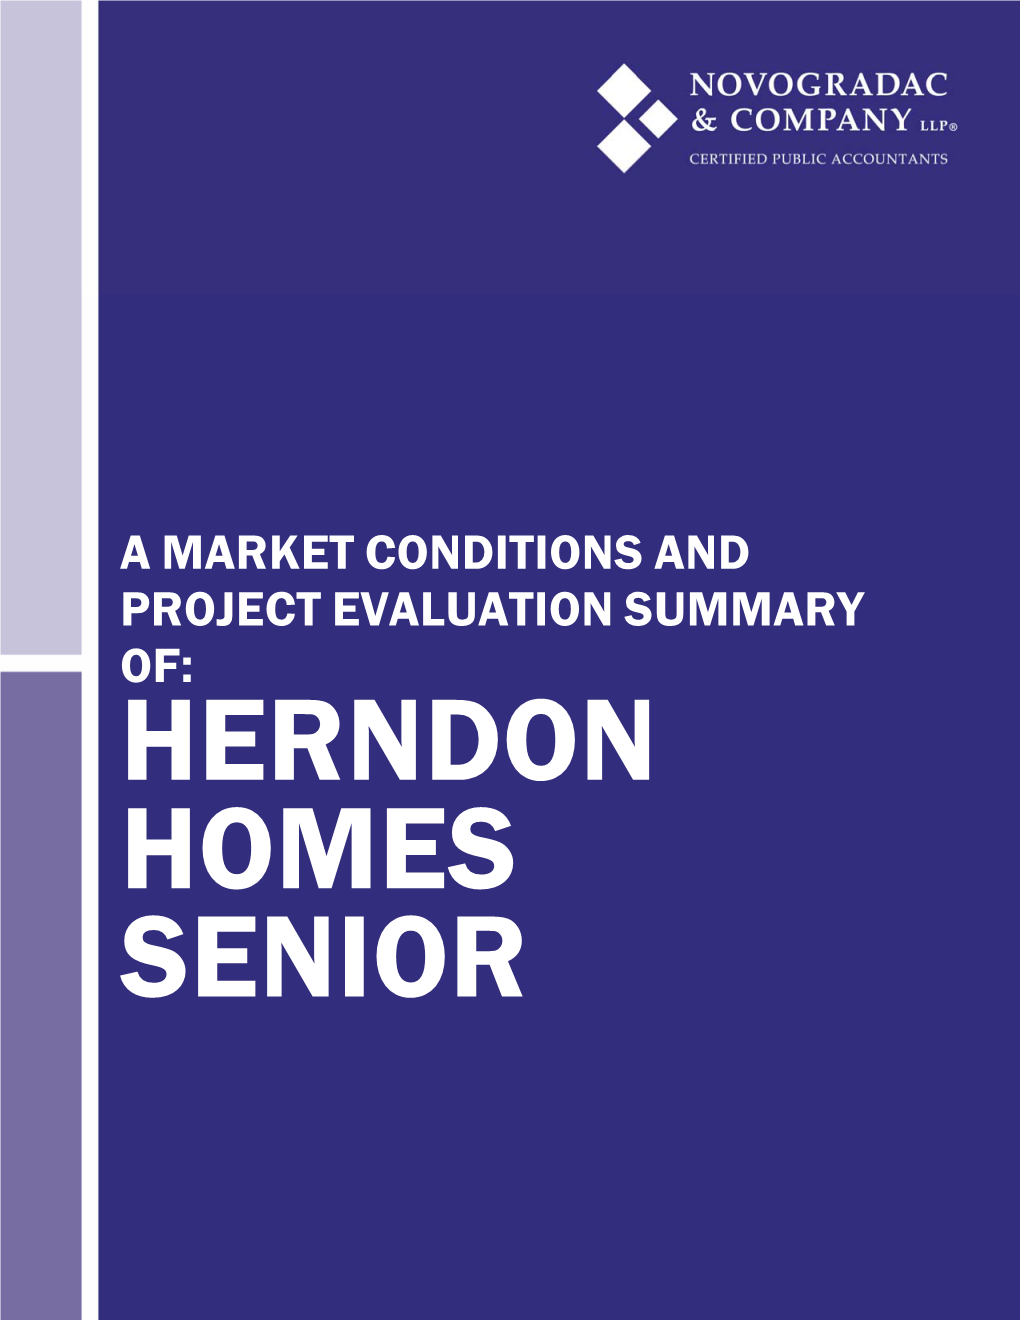 A Market Conditions and Project Evaluation Summary Of: Herndon Homes Senior